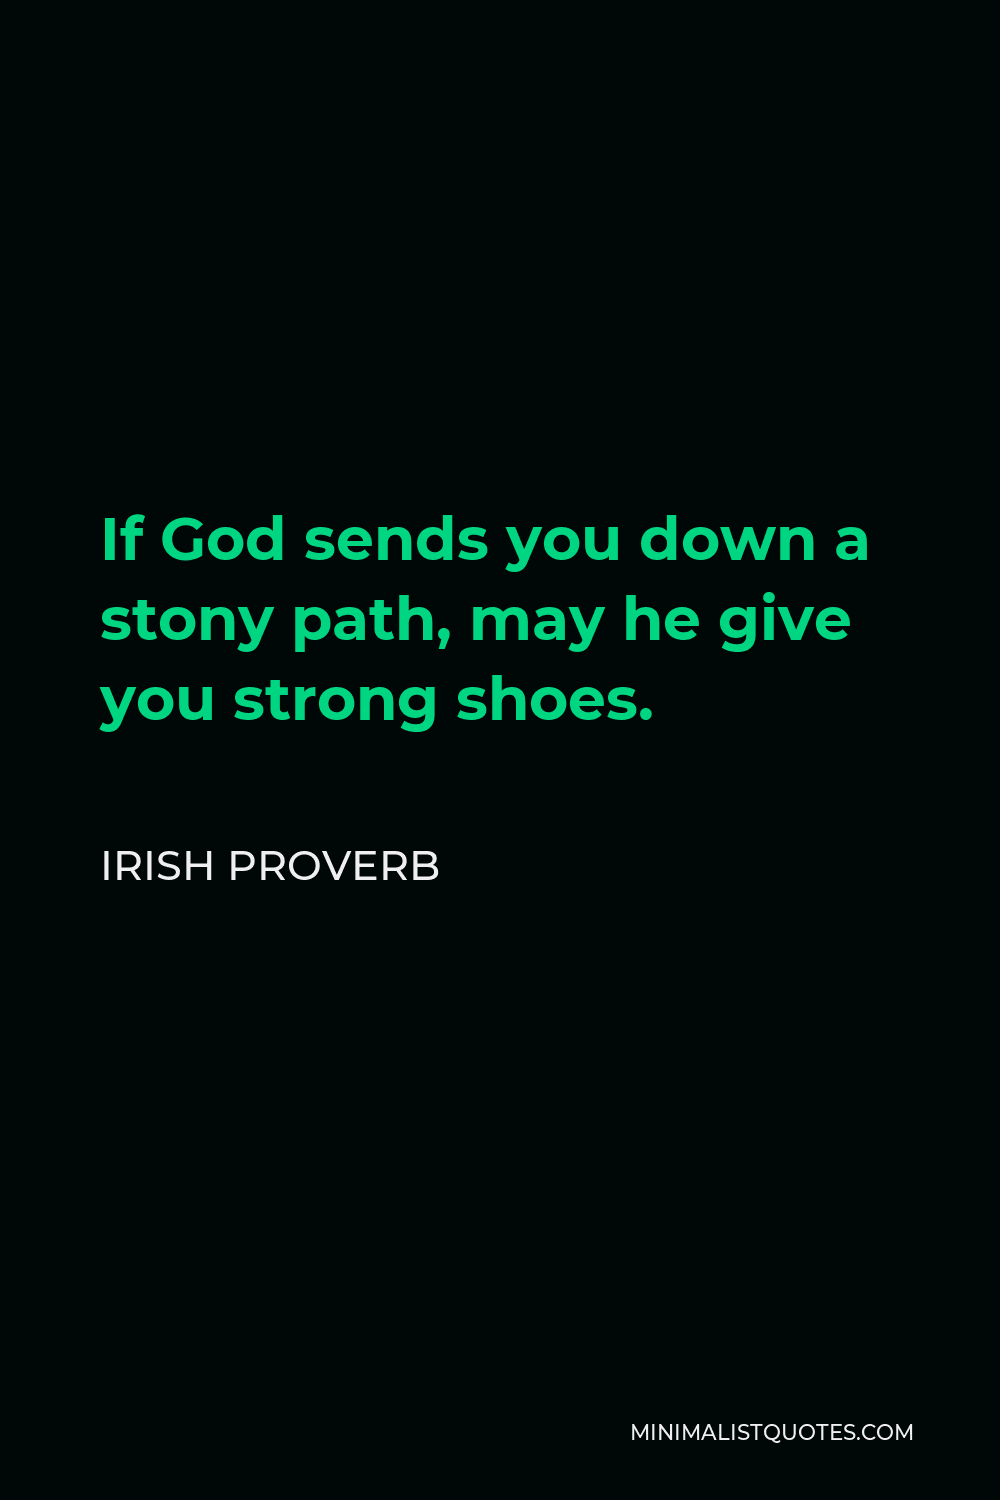 Irish Proverb Quote - If God sends you down a stony path, may he give you strong shoes.